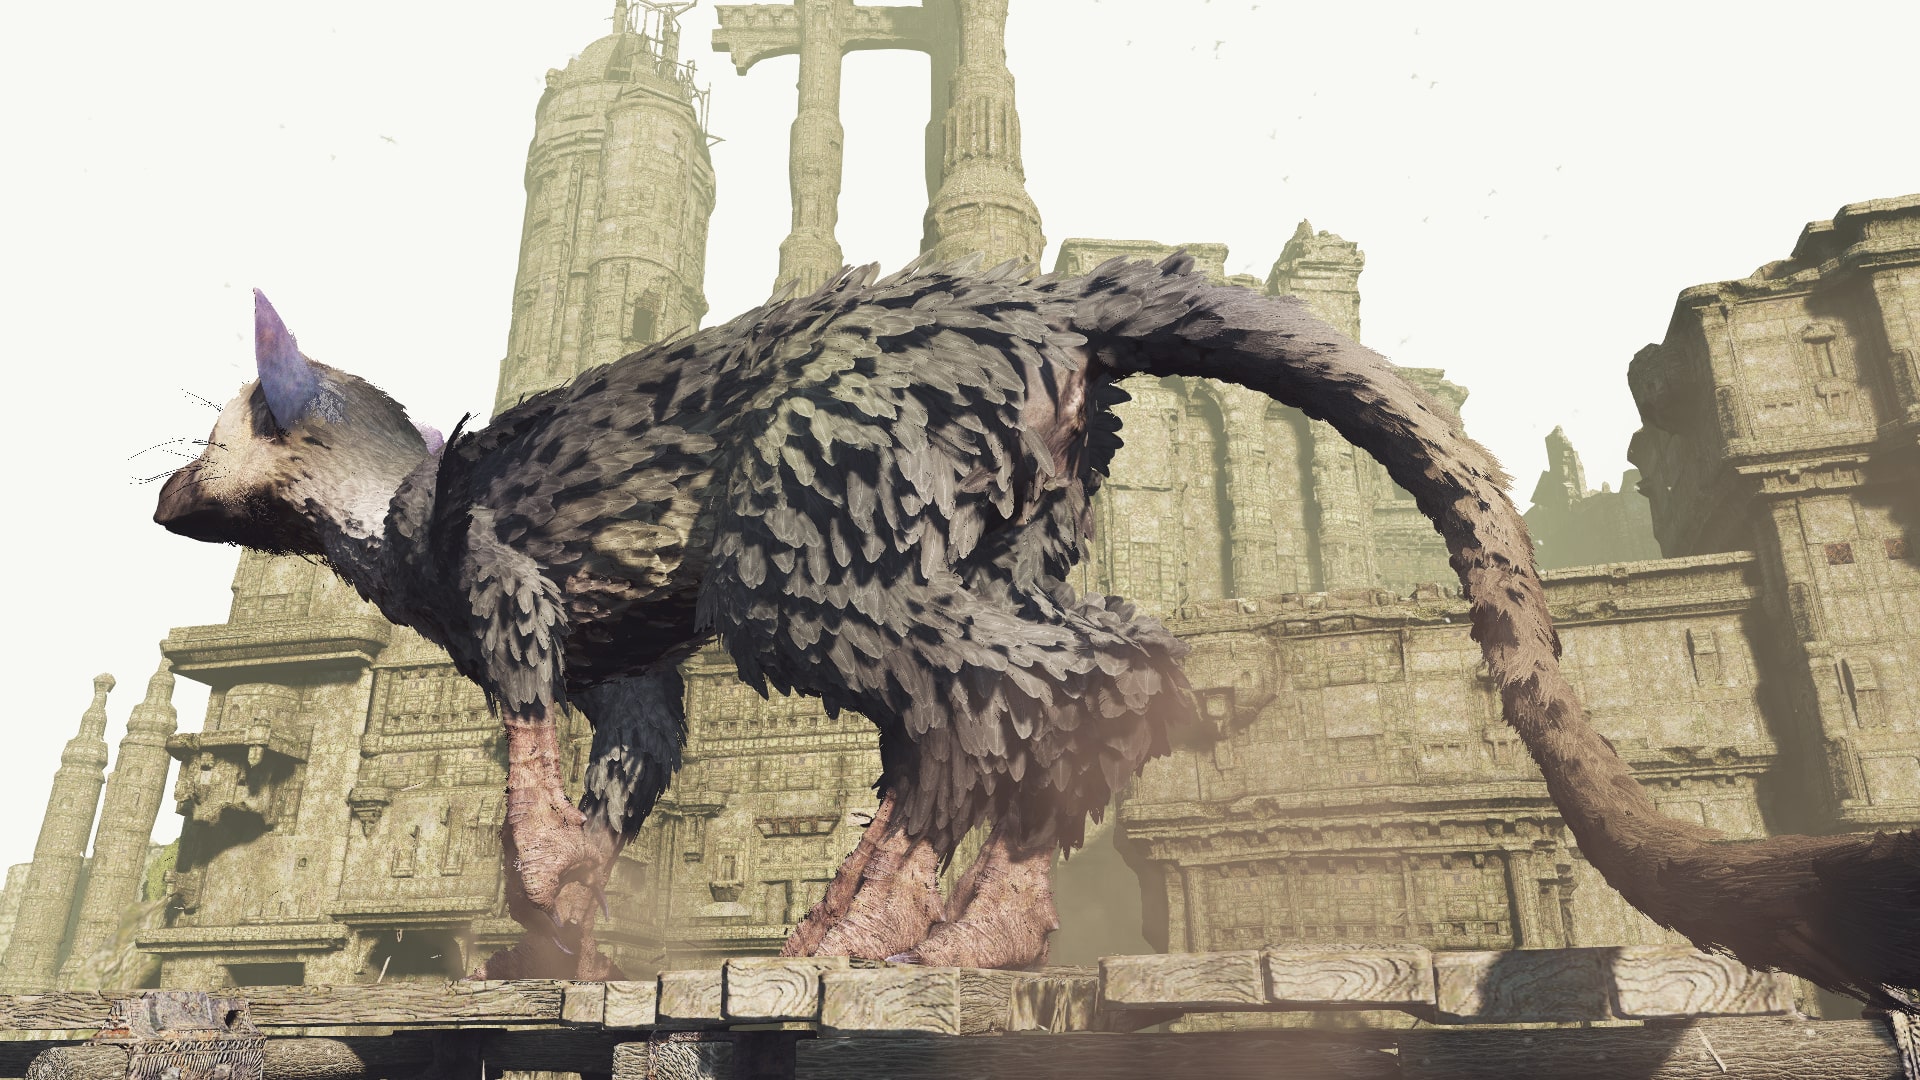 Trico - The last Guardian · Envyious · Online Store Powered by Storenvy